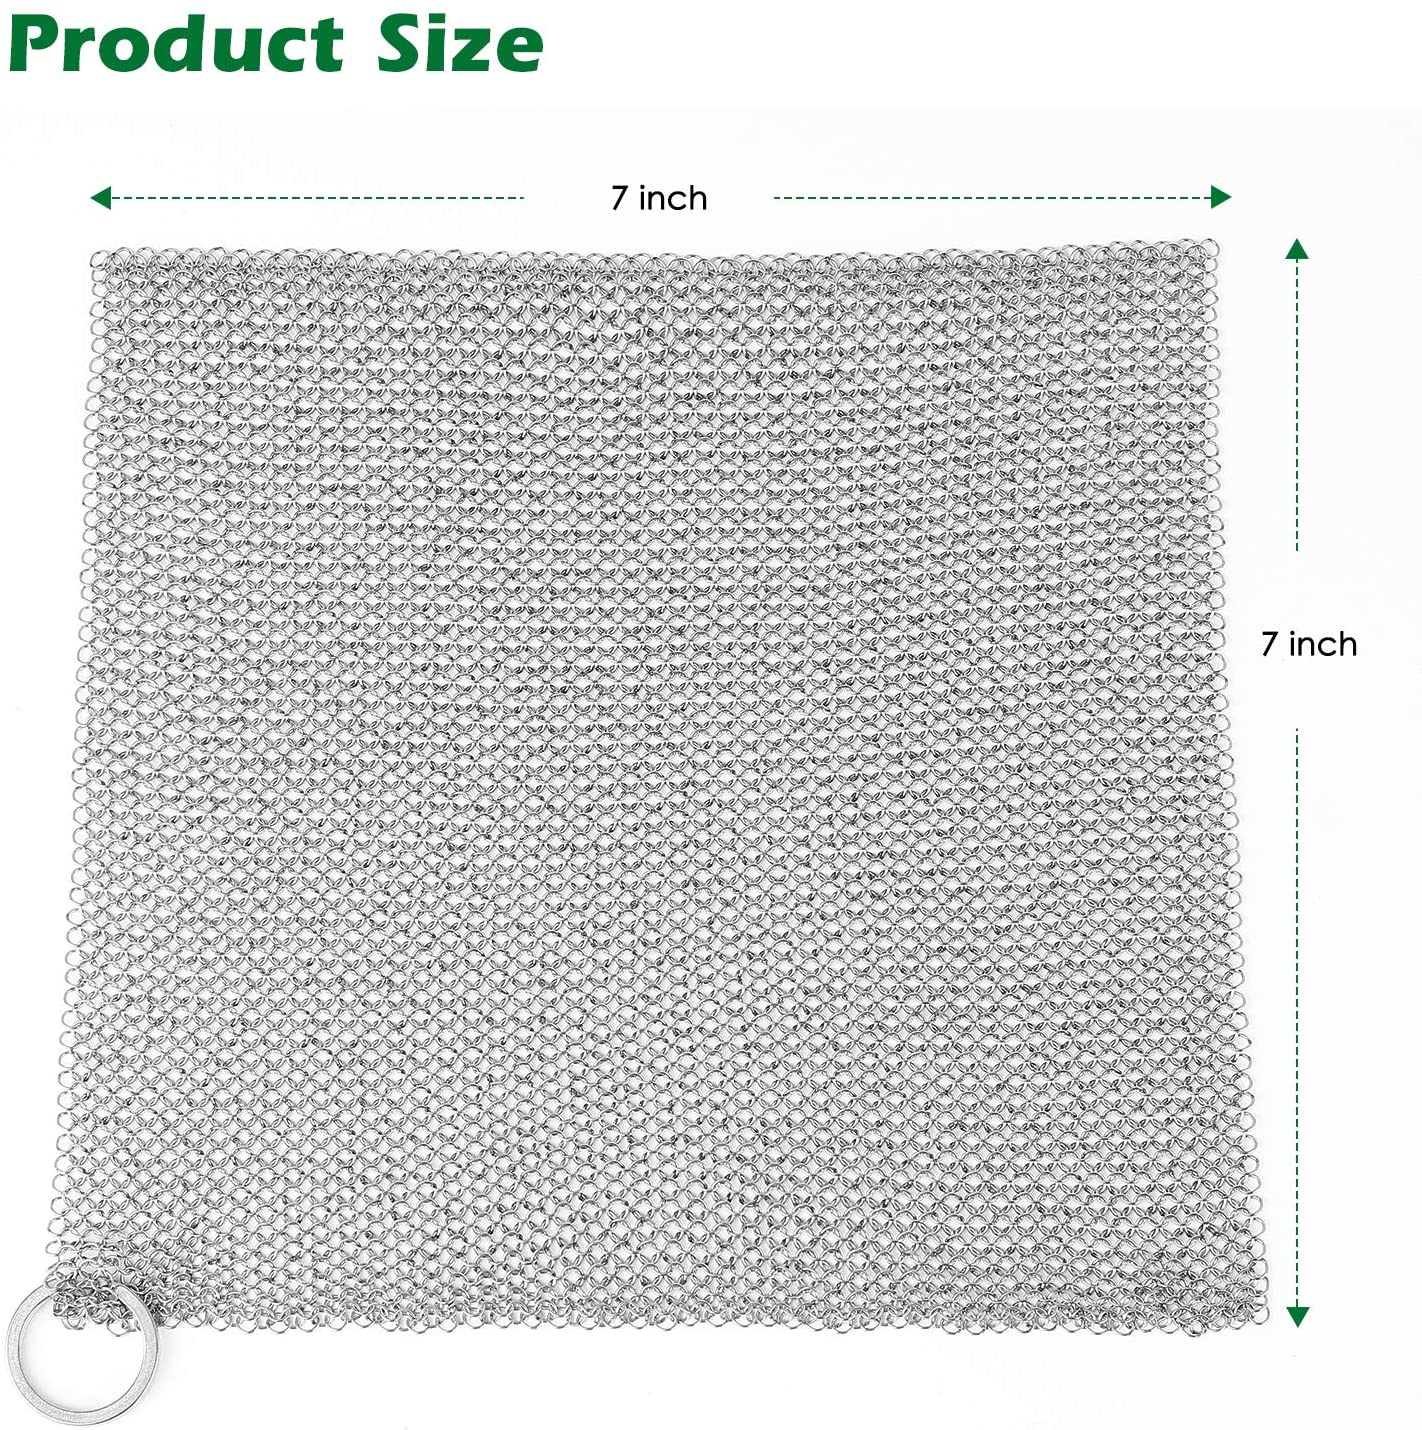 Camp Chef Chainmail Scrubber - Stainless Steel Scrubber for Cleaning Cast  Iron, Steel & More - 7 x 7